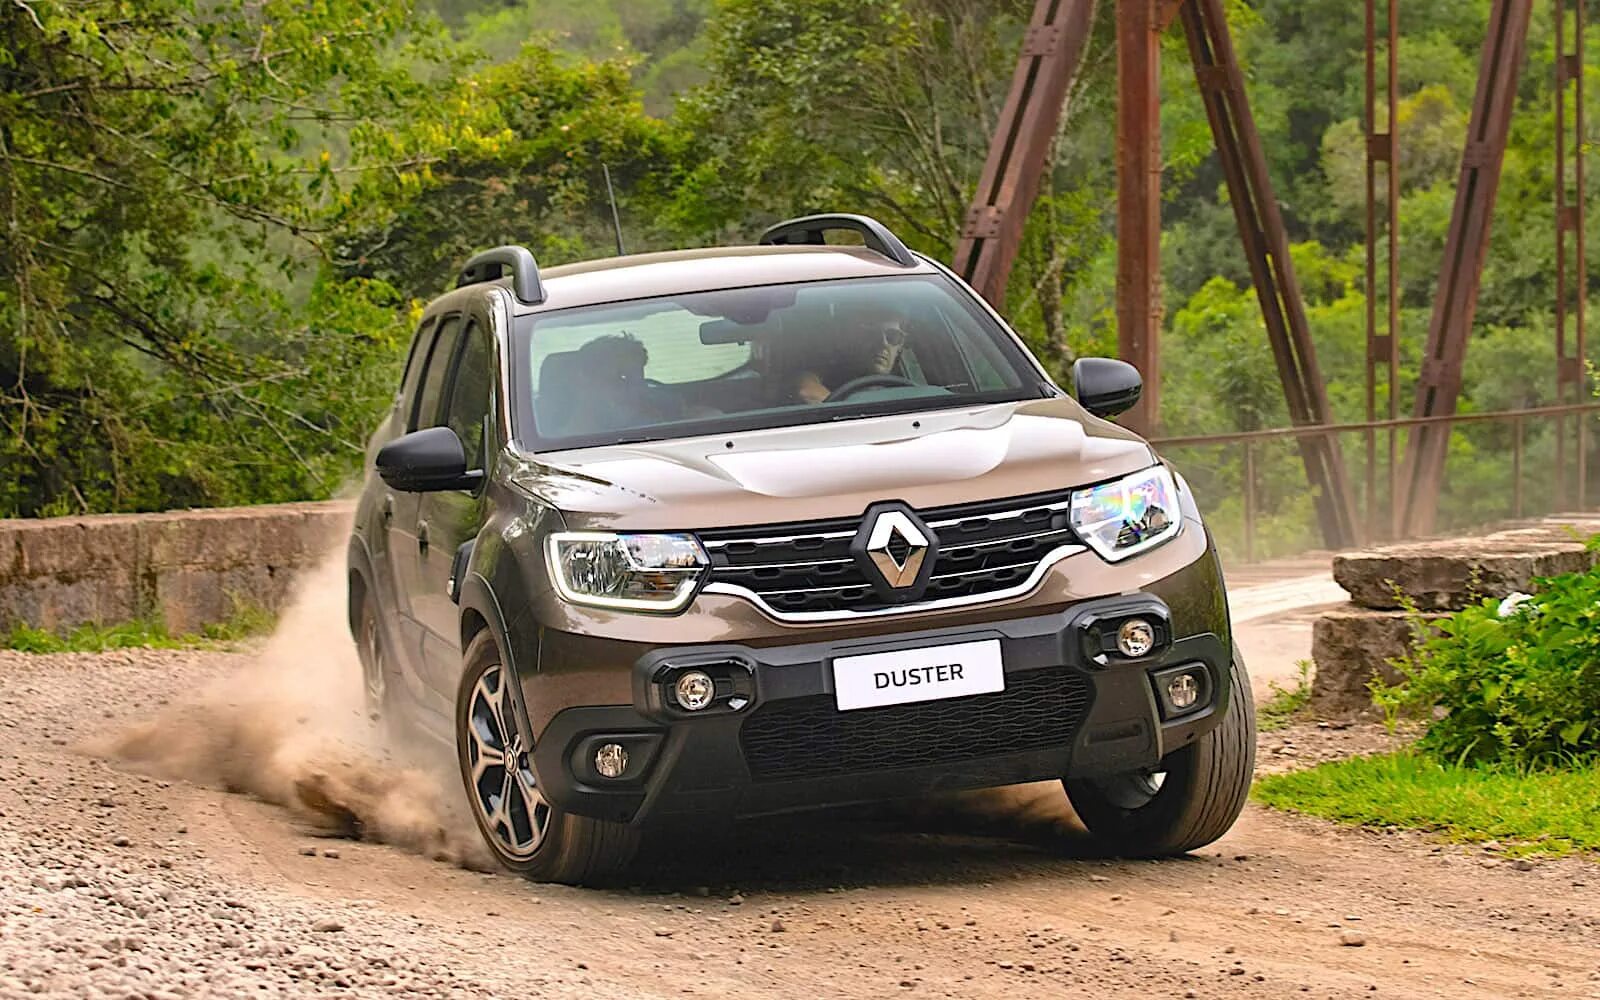 Рено дастер 2021 2.0. Renault Duster 2021. Новый Renault Duster 2021. Renault Дастер 2021. Renault Duster 2016.